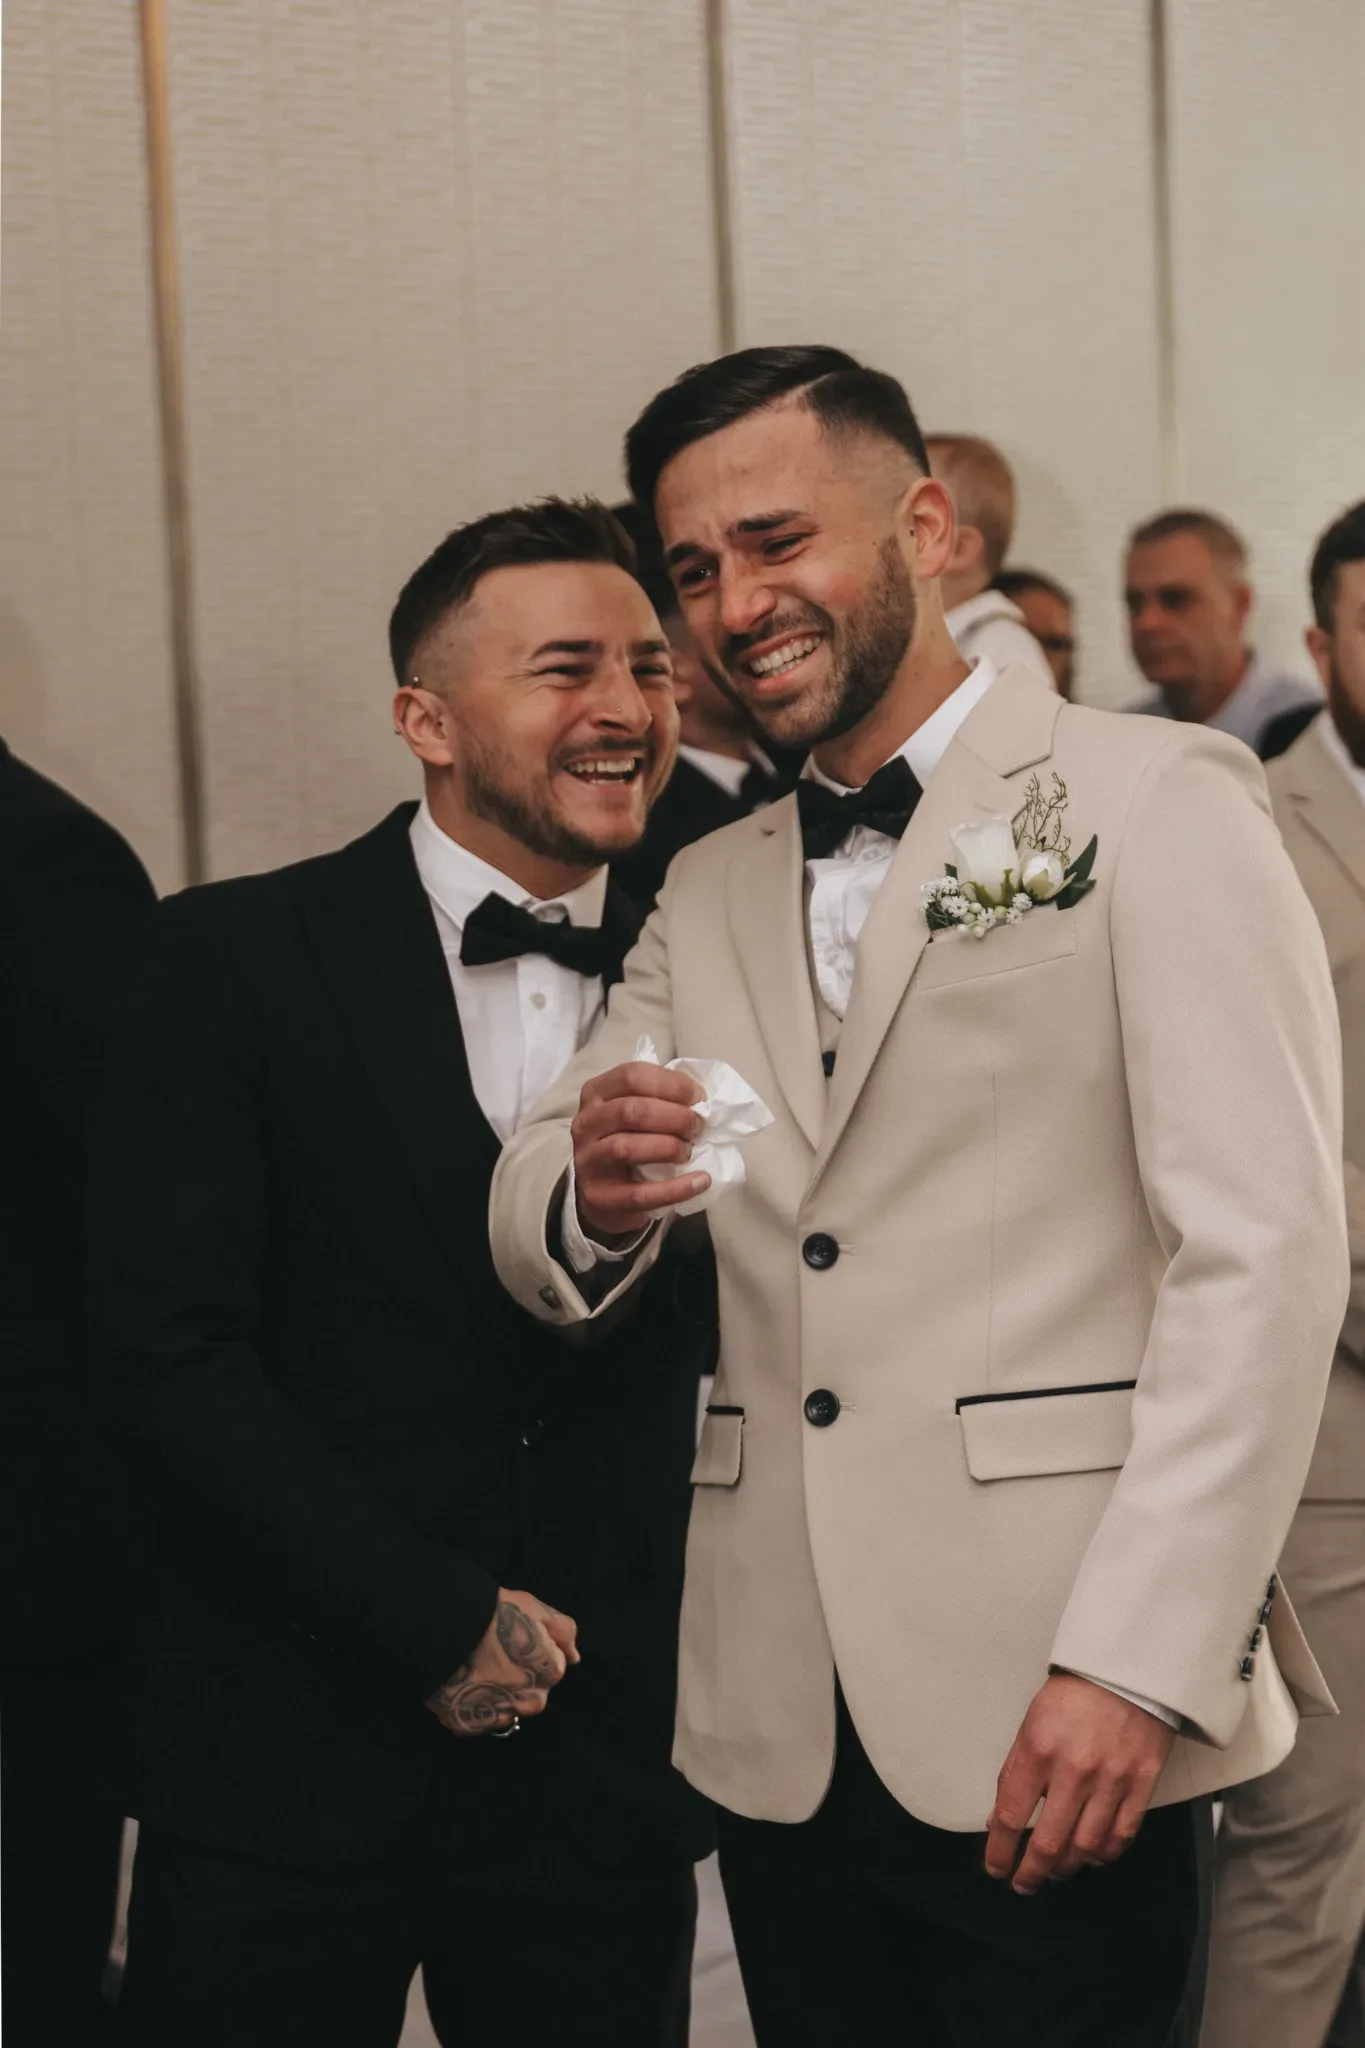 Two men in formal wedding attire, one in a black tuxedo and the other in a cream suit, smile joyfully at a wedding. the man in black wipes away a tear, hinting at an emotional moment.